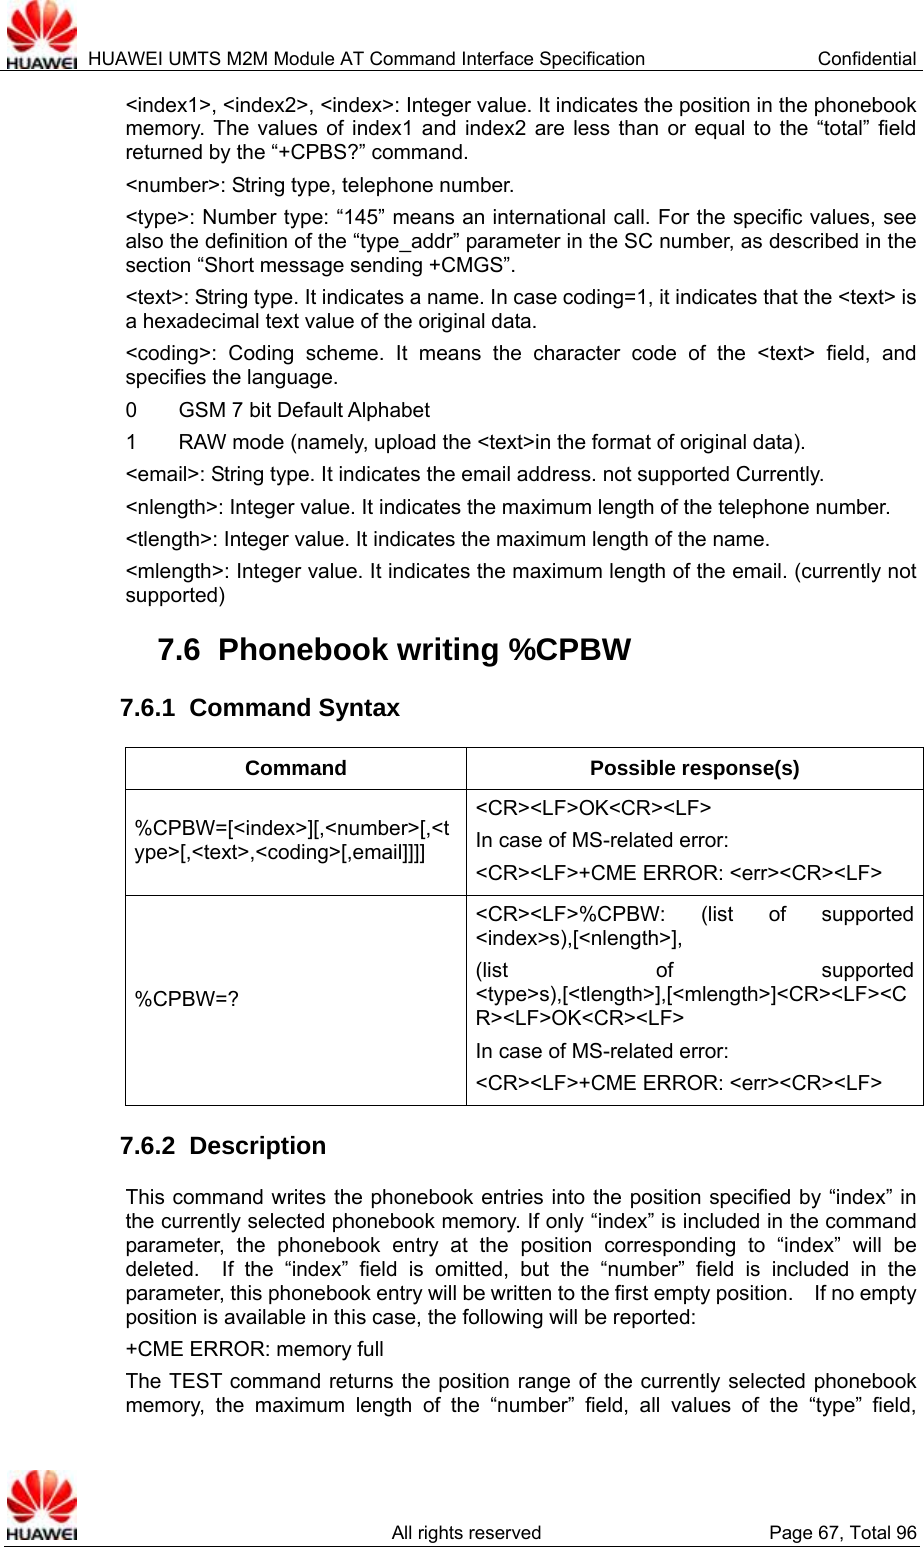  HUAWEI UMTS M2M Module AT Command Interface Specification  Confidential   All rights reserved  Page 67, Total 96 &lt;index1&gt;, &lt;index2&gt;, &lt;index&gt;: Integer value. It indicates the position in the phonebook memory. The values of index1 and index2 are less than or equal to the “total” field returned by the “+CPBS?” command.   &lt;number&gt;: String type, telephone number.   &lt;type&gt;: Number type: “145” means an international call. For the specific values, see also the definition of the “type_addr” parameter in the SC number, as described in the section “Short message sending +CMGS”.     &lt;text&gt;: String type. It indicates a name. In case coding=1, it indicates that the &lt;text&gt; is a hexadecimal text value of the original data.   &lt;coding&gt;: Coding scheme. It means the character code of the &lt;text&gt; field, and specifies the language.   0    GSM 7 bit Default Alphabet 1        RAW mode (namely, upload the &lt;text&gt;in the format of original data).   &lt;email&gt;: String type. It indicates the email address. not supported Currently. &lt;nlength&gt;: Integer value. It indicates the maximum length of the telephone number.   &lt;tlength&gt;: Integer value. It indicates the maximum length of the name.   &lt;mlength&gt;: Integer value. It indicates the maximum length of the email. (currently not supported) 7.6  Phonebook writing %CPBW 7.6.1  Command Syntax Command Possible response(s) %CPBW=[&lt;index&gt;][,&lt;number&gt;[,&lt;type&gt;[,&lt;text&gt;,&lt;coding&gt;[,email]]]] &lt;CR&gt;&lt;LF&gt;OK&lt;CR&gt;&lt;LF&gt; In case of MS-related error:   &lt;CR&gt;&lt;LF&gt;+CME ERROR: &lt;err&gt;&lt;CR&gt;&lt;LF&gt; %CPBW=? &lt;CR&gt;&lt;LF&gt;%CPBW: (list of supported &lt;index&gt;s),[&lt;nlength&gt;], (list of supported &lt;type&gt;s),[&lt;tlength&gt;],[&lt;mlength&gt;]&lt;CR&gt;&lt;LF&gt;&lt;CR&gt;&lt;LF&gt;OK&lt;CR&gt;&lt;LF&gt; In case of MS-related error:   &lt;CR&gt;&lt;LF&gt;+CME ERROR: &lt;err&gt;&lt;CR&gt;&lt;LF&gt; 7.6.2  Description This command writes the phonebook entries into the position specified by “index” in the currently selected phonebook memory. If only “index” is included in the command parameter, the phonebook entry at the position corresponding to “index” will be deleted.  If the “index” field is omitted, but the “number” field is included in the parameter, this phonebook entry will be written to the first empty position.    If no empty position is available in this case, the following will be reported:   +CME ERROR: memory full The TEST command returns the position range of the currently selected phonebook memory, the maximum length of the “number” field, all values of the “type” field, 